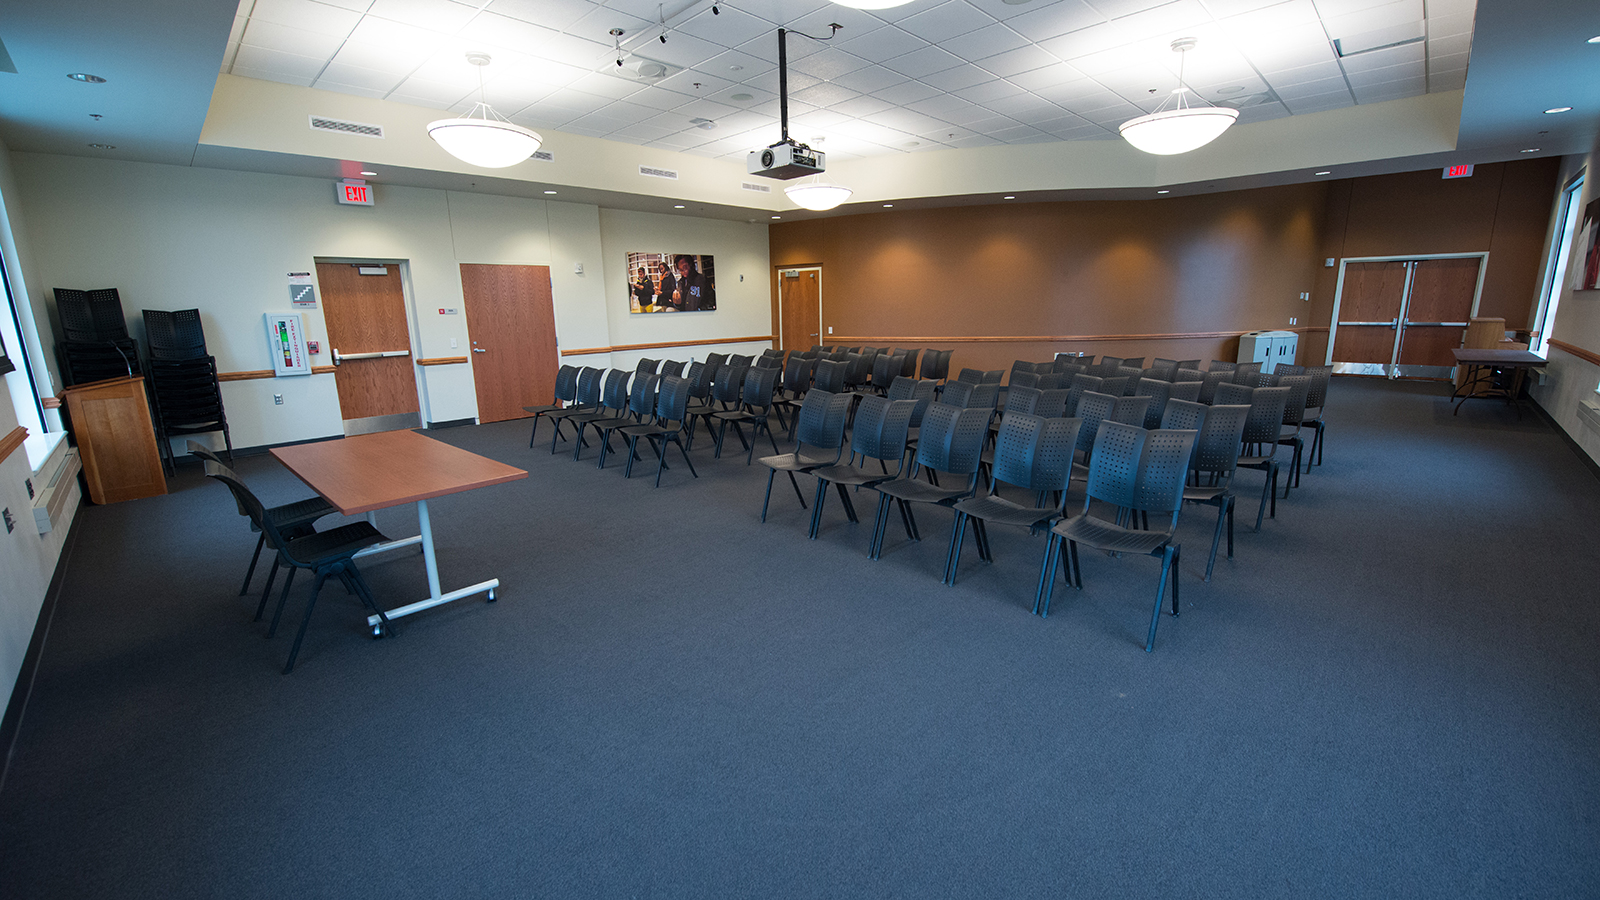 Meeting room in Gaughan Center filled with chairs and projector.